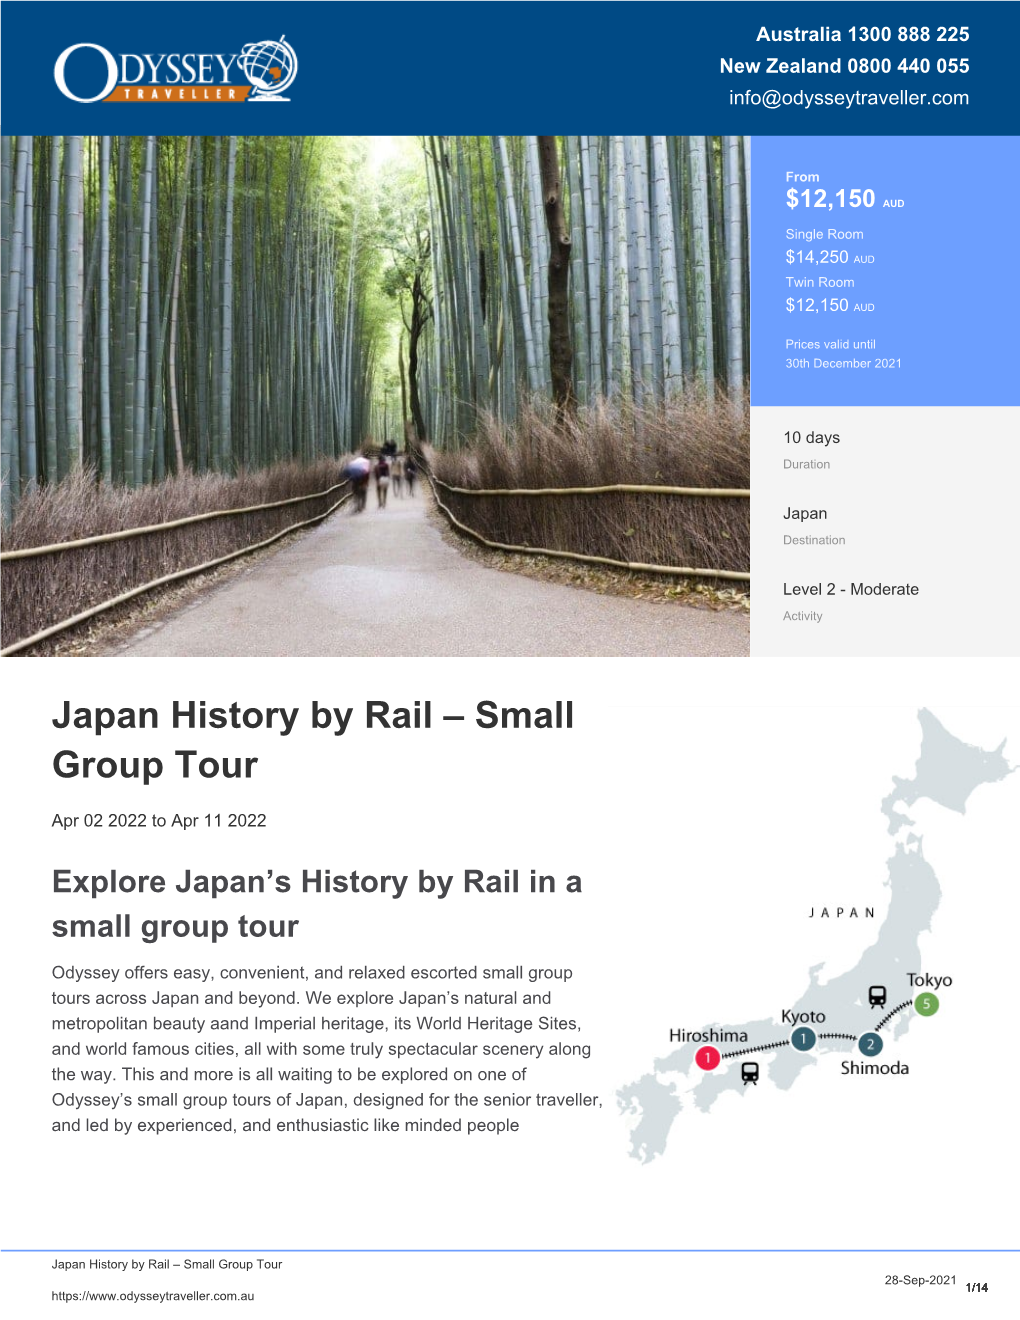 Japan History by Rail | Small Group Tour for Seniors | Odyssey Traveller